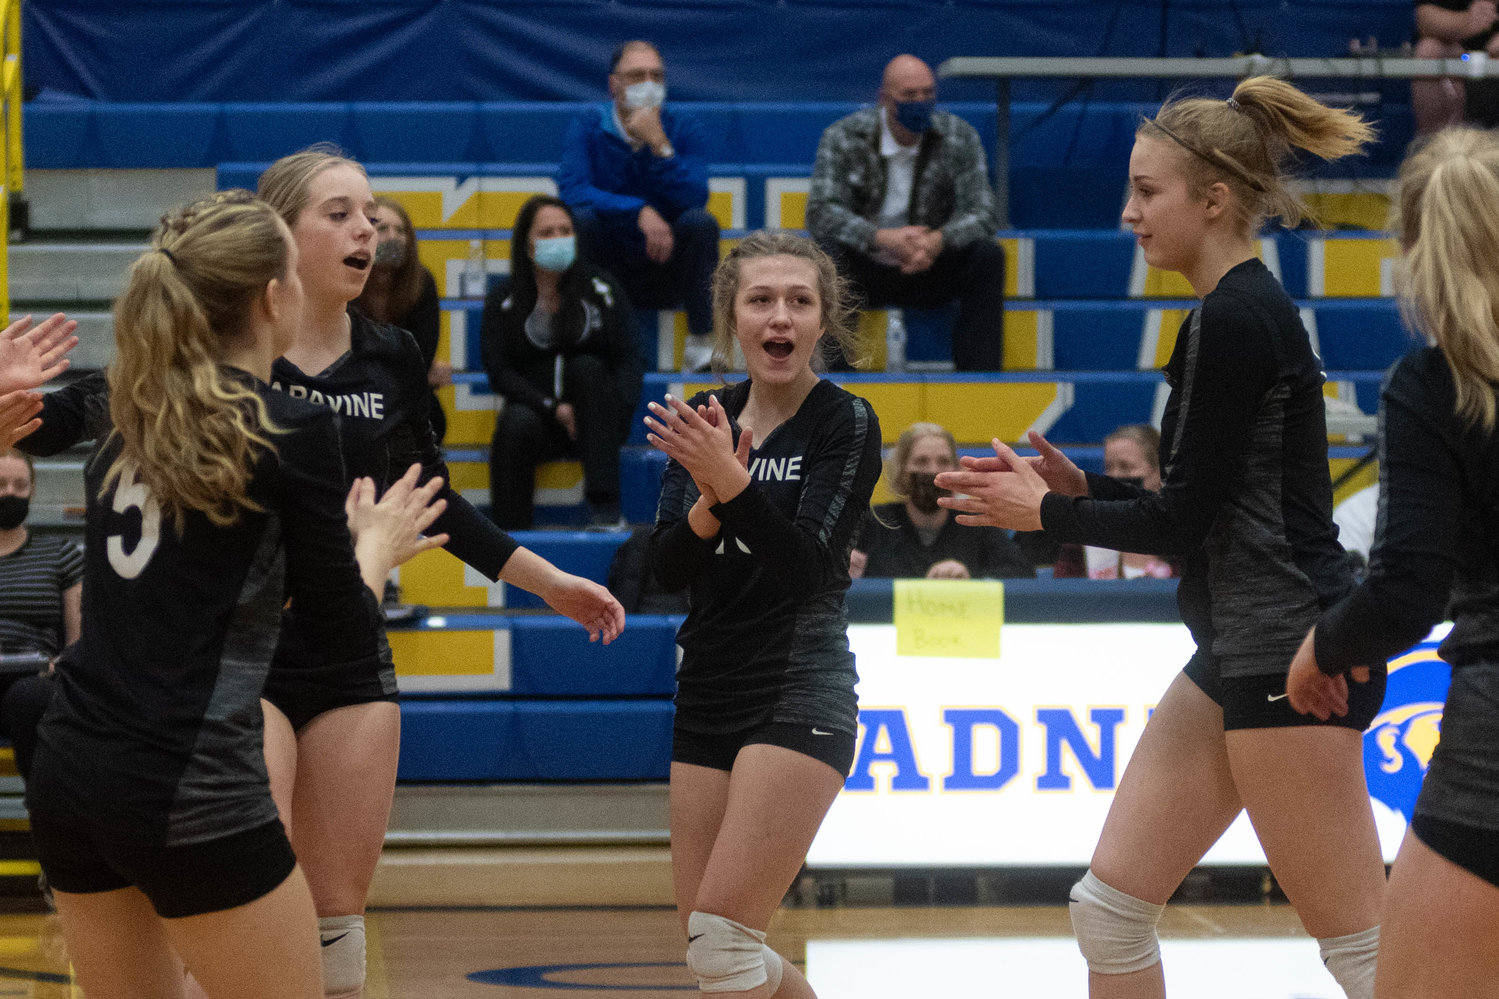 The Napavine volleyball team celebrates a point against Ilwaco in the second round of the District 4 Tournament in Adna Oct. 30.